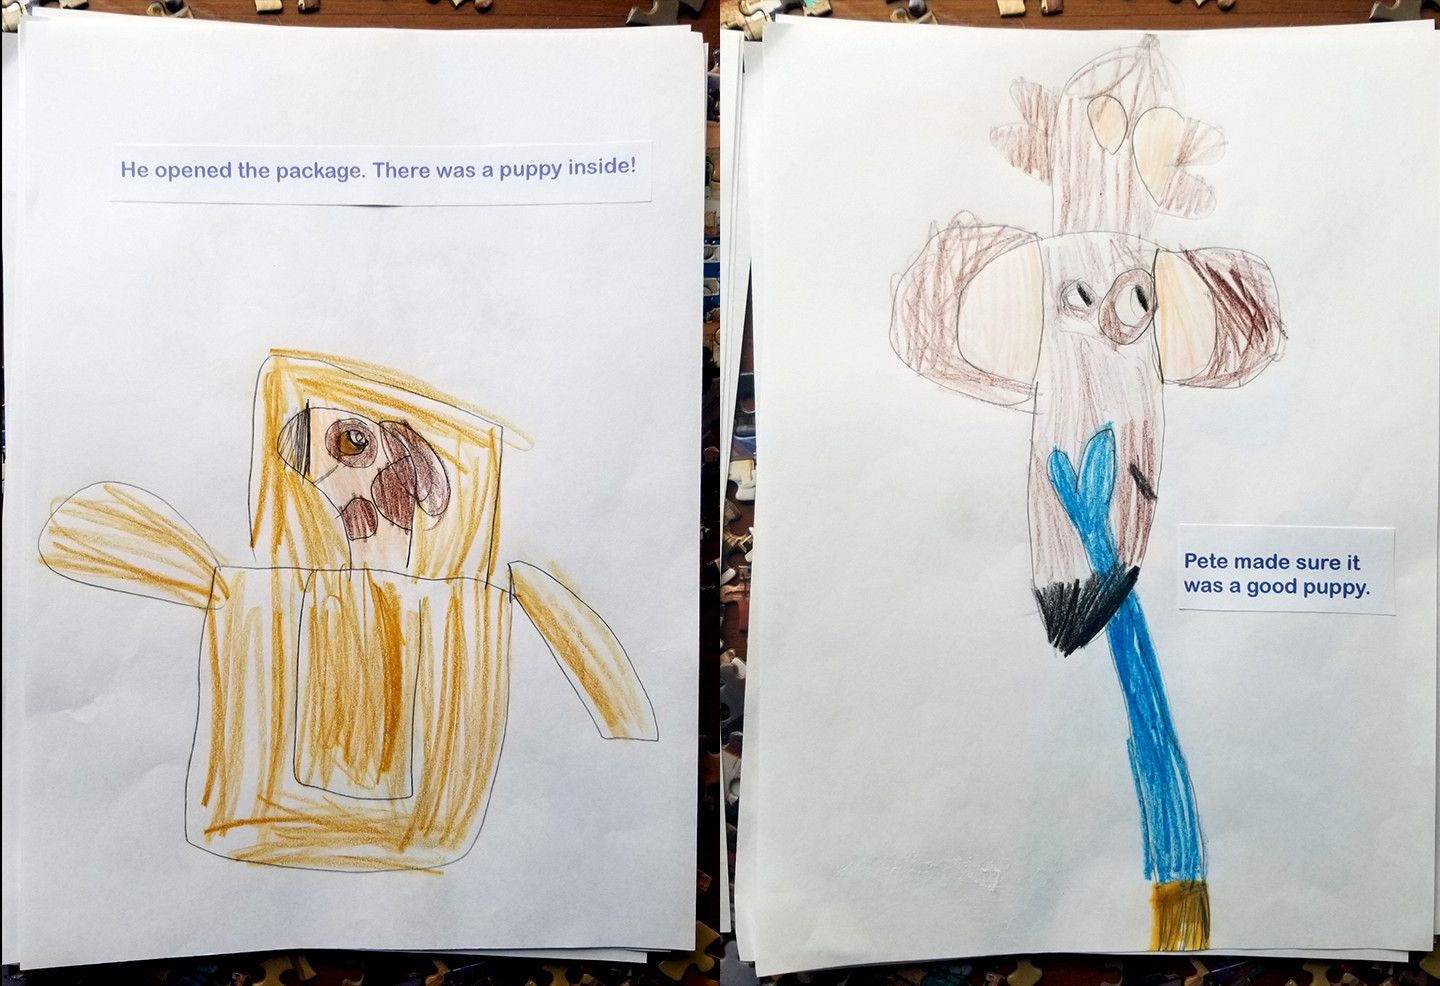 Left page is a drawing of a dog in a box with the text "He opened the package. There was a puppy inside." The right page is a hand petting a dog  with the text "Pete made sure it was a good puppy"